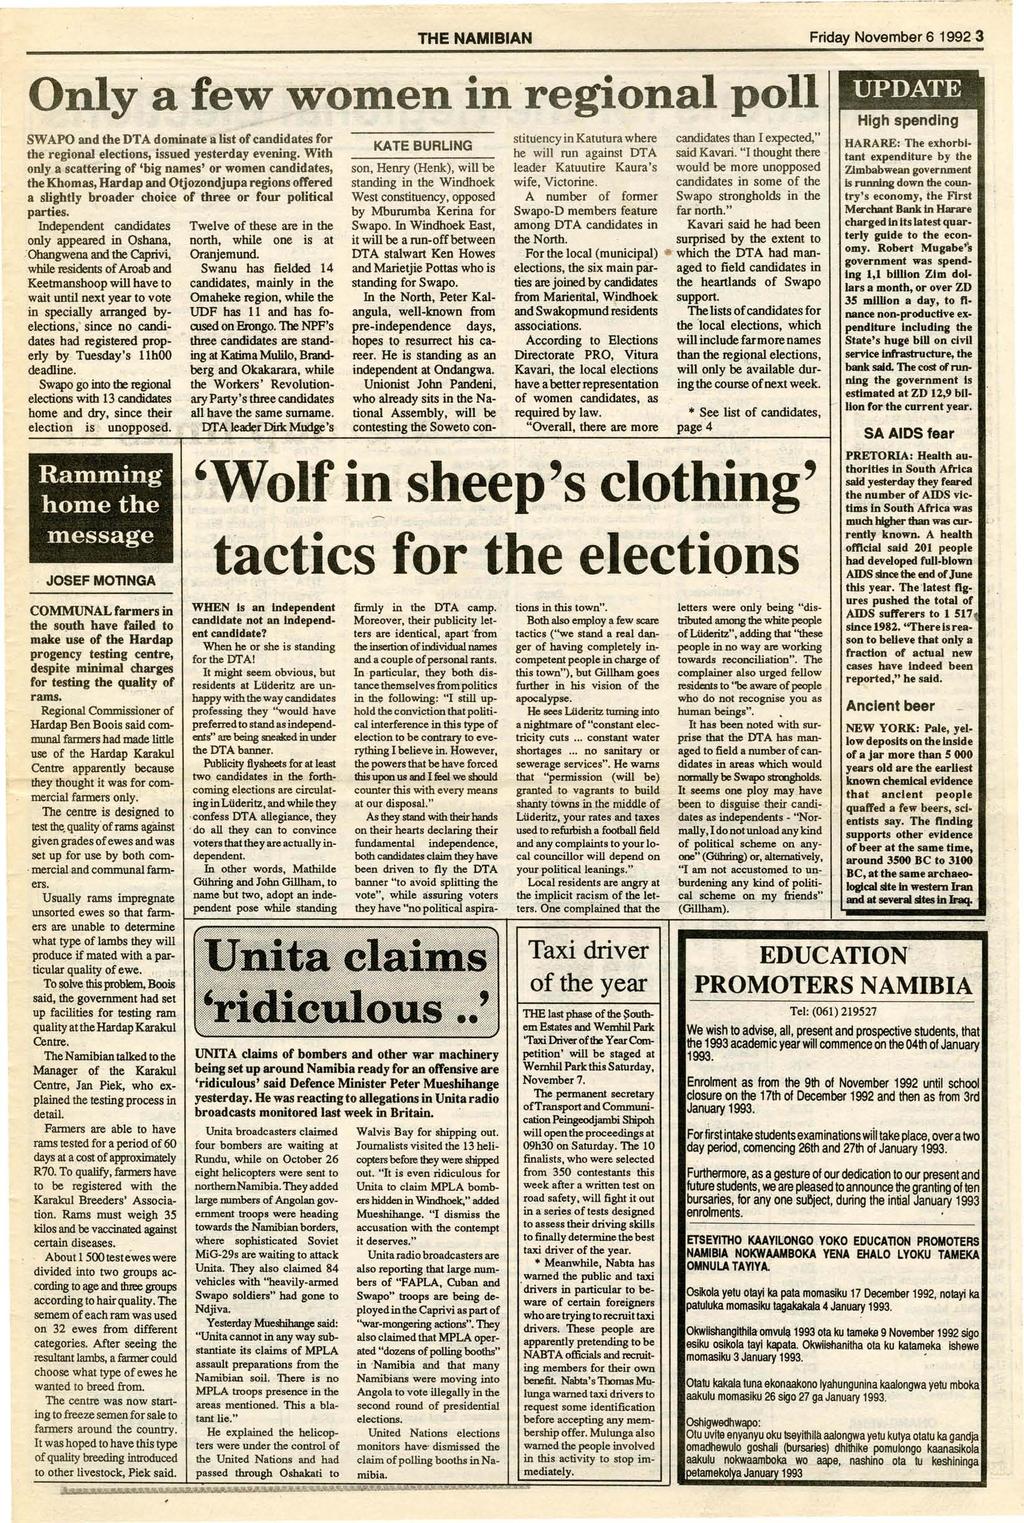 THE NAMIBIAN Friday November 6 1992 3 Only' a few women in regional poll UPDATE SWAPO and the DT A dominate a list of candidates for the regional elections, issued yesterday evening.